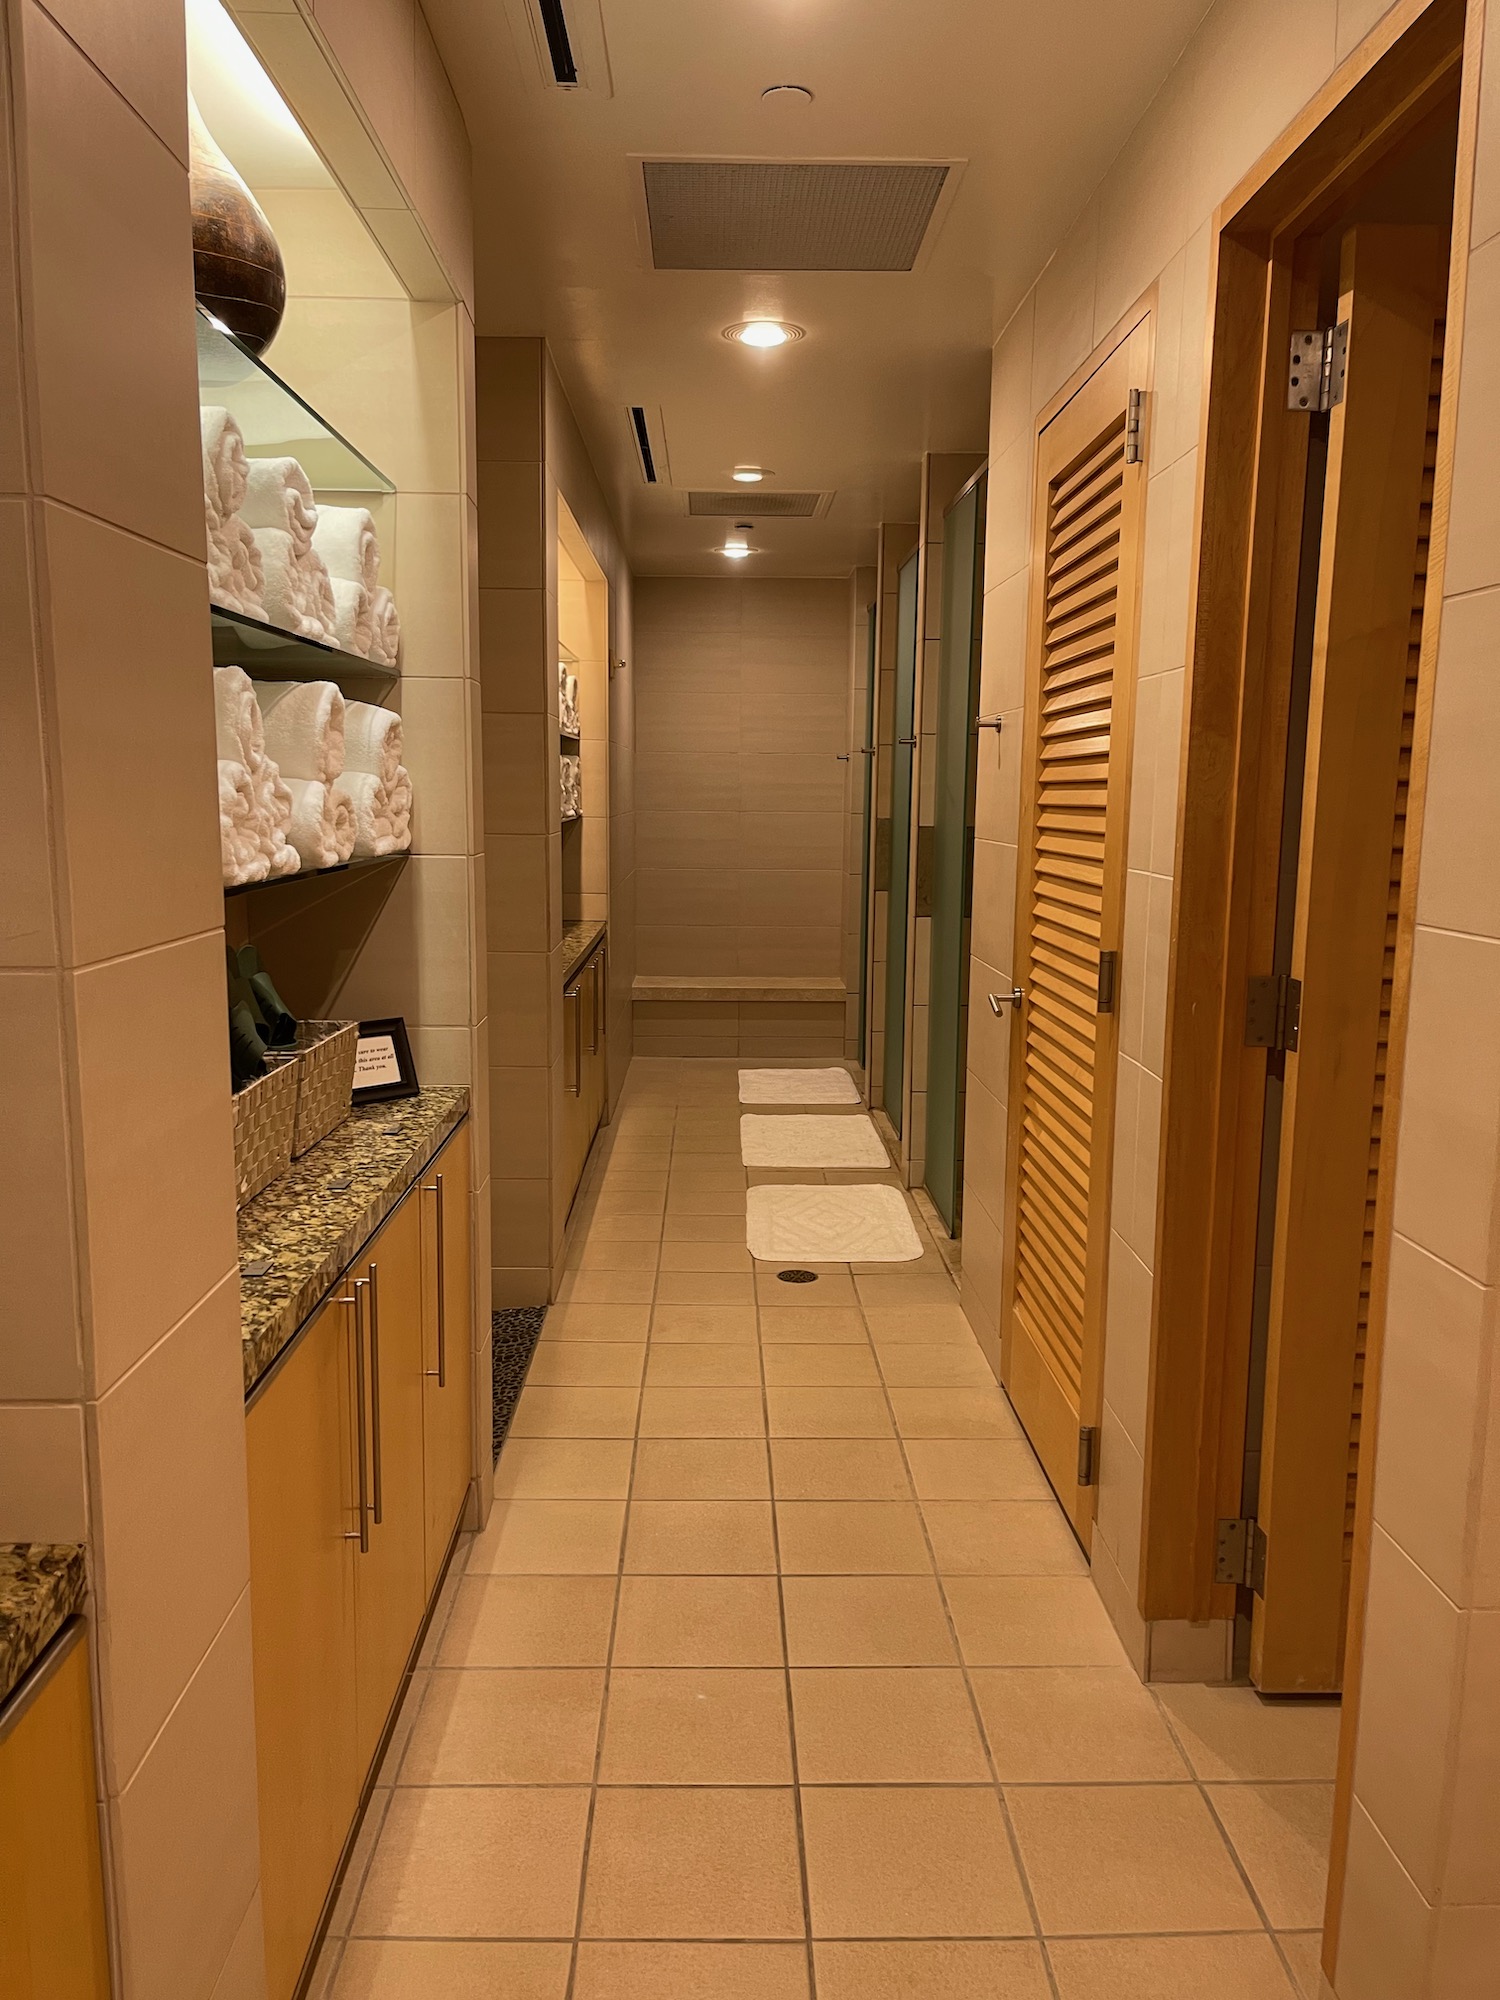 a bathroom with a row of shelves and towels